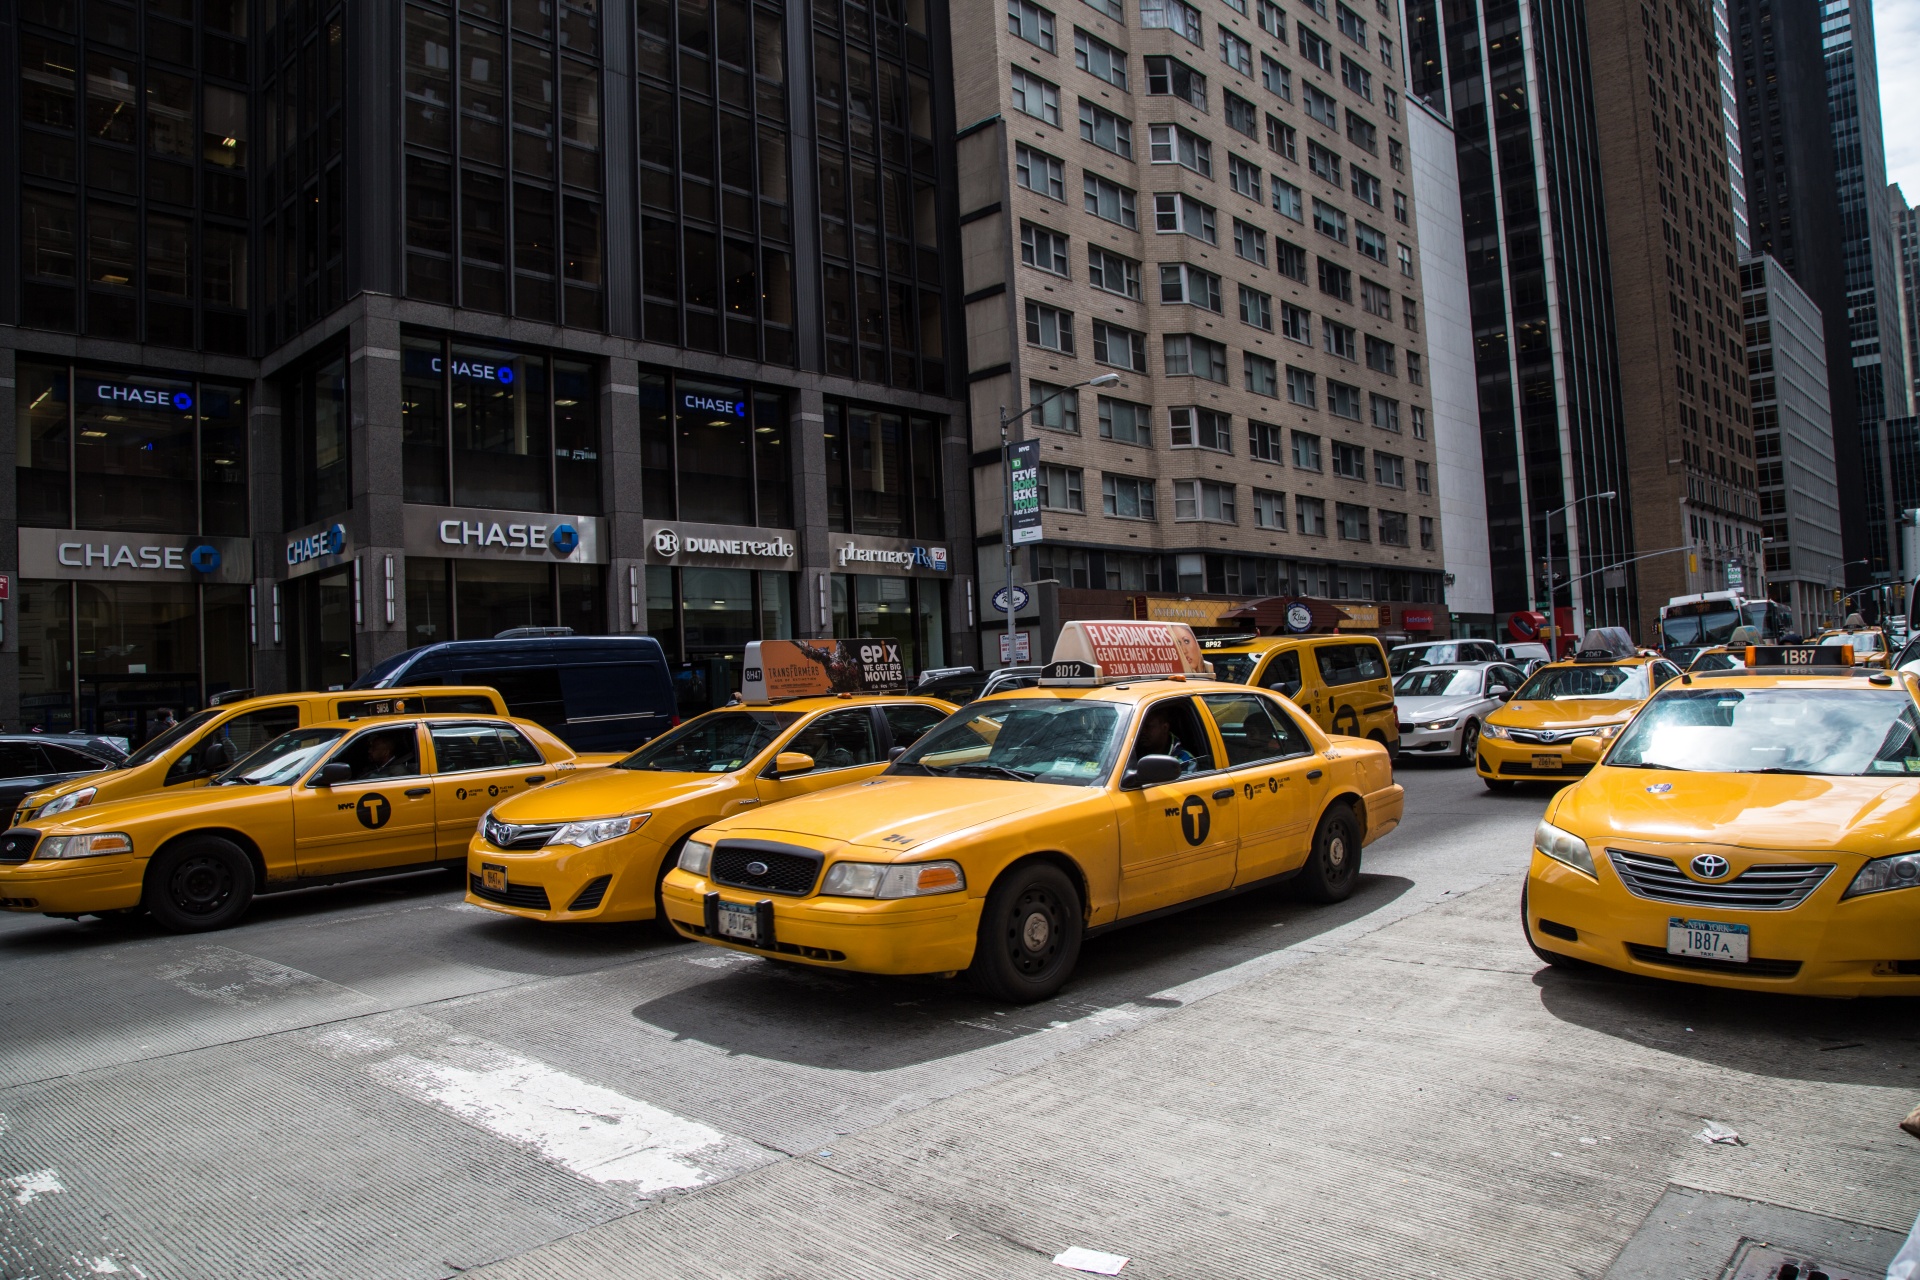 New York street cabs taxis-Cities Photography HD Wallpaper Preview ...